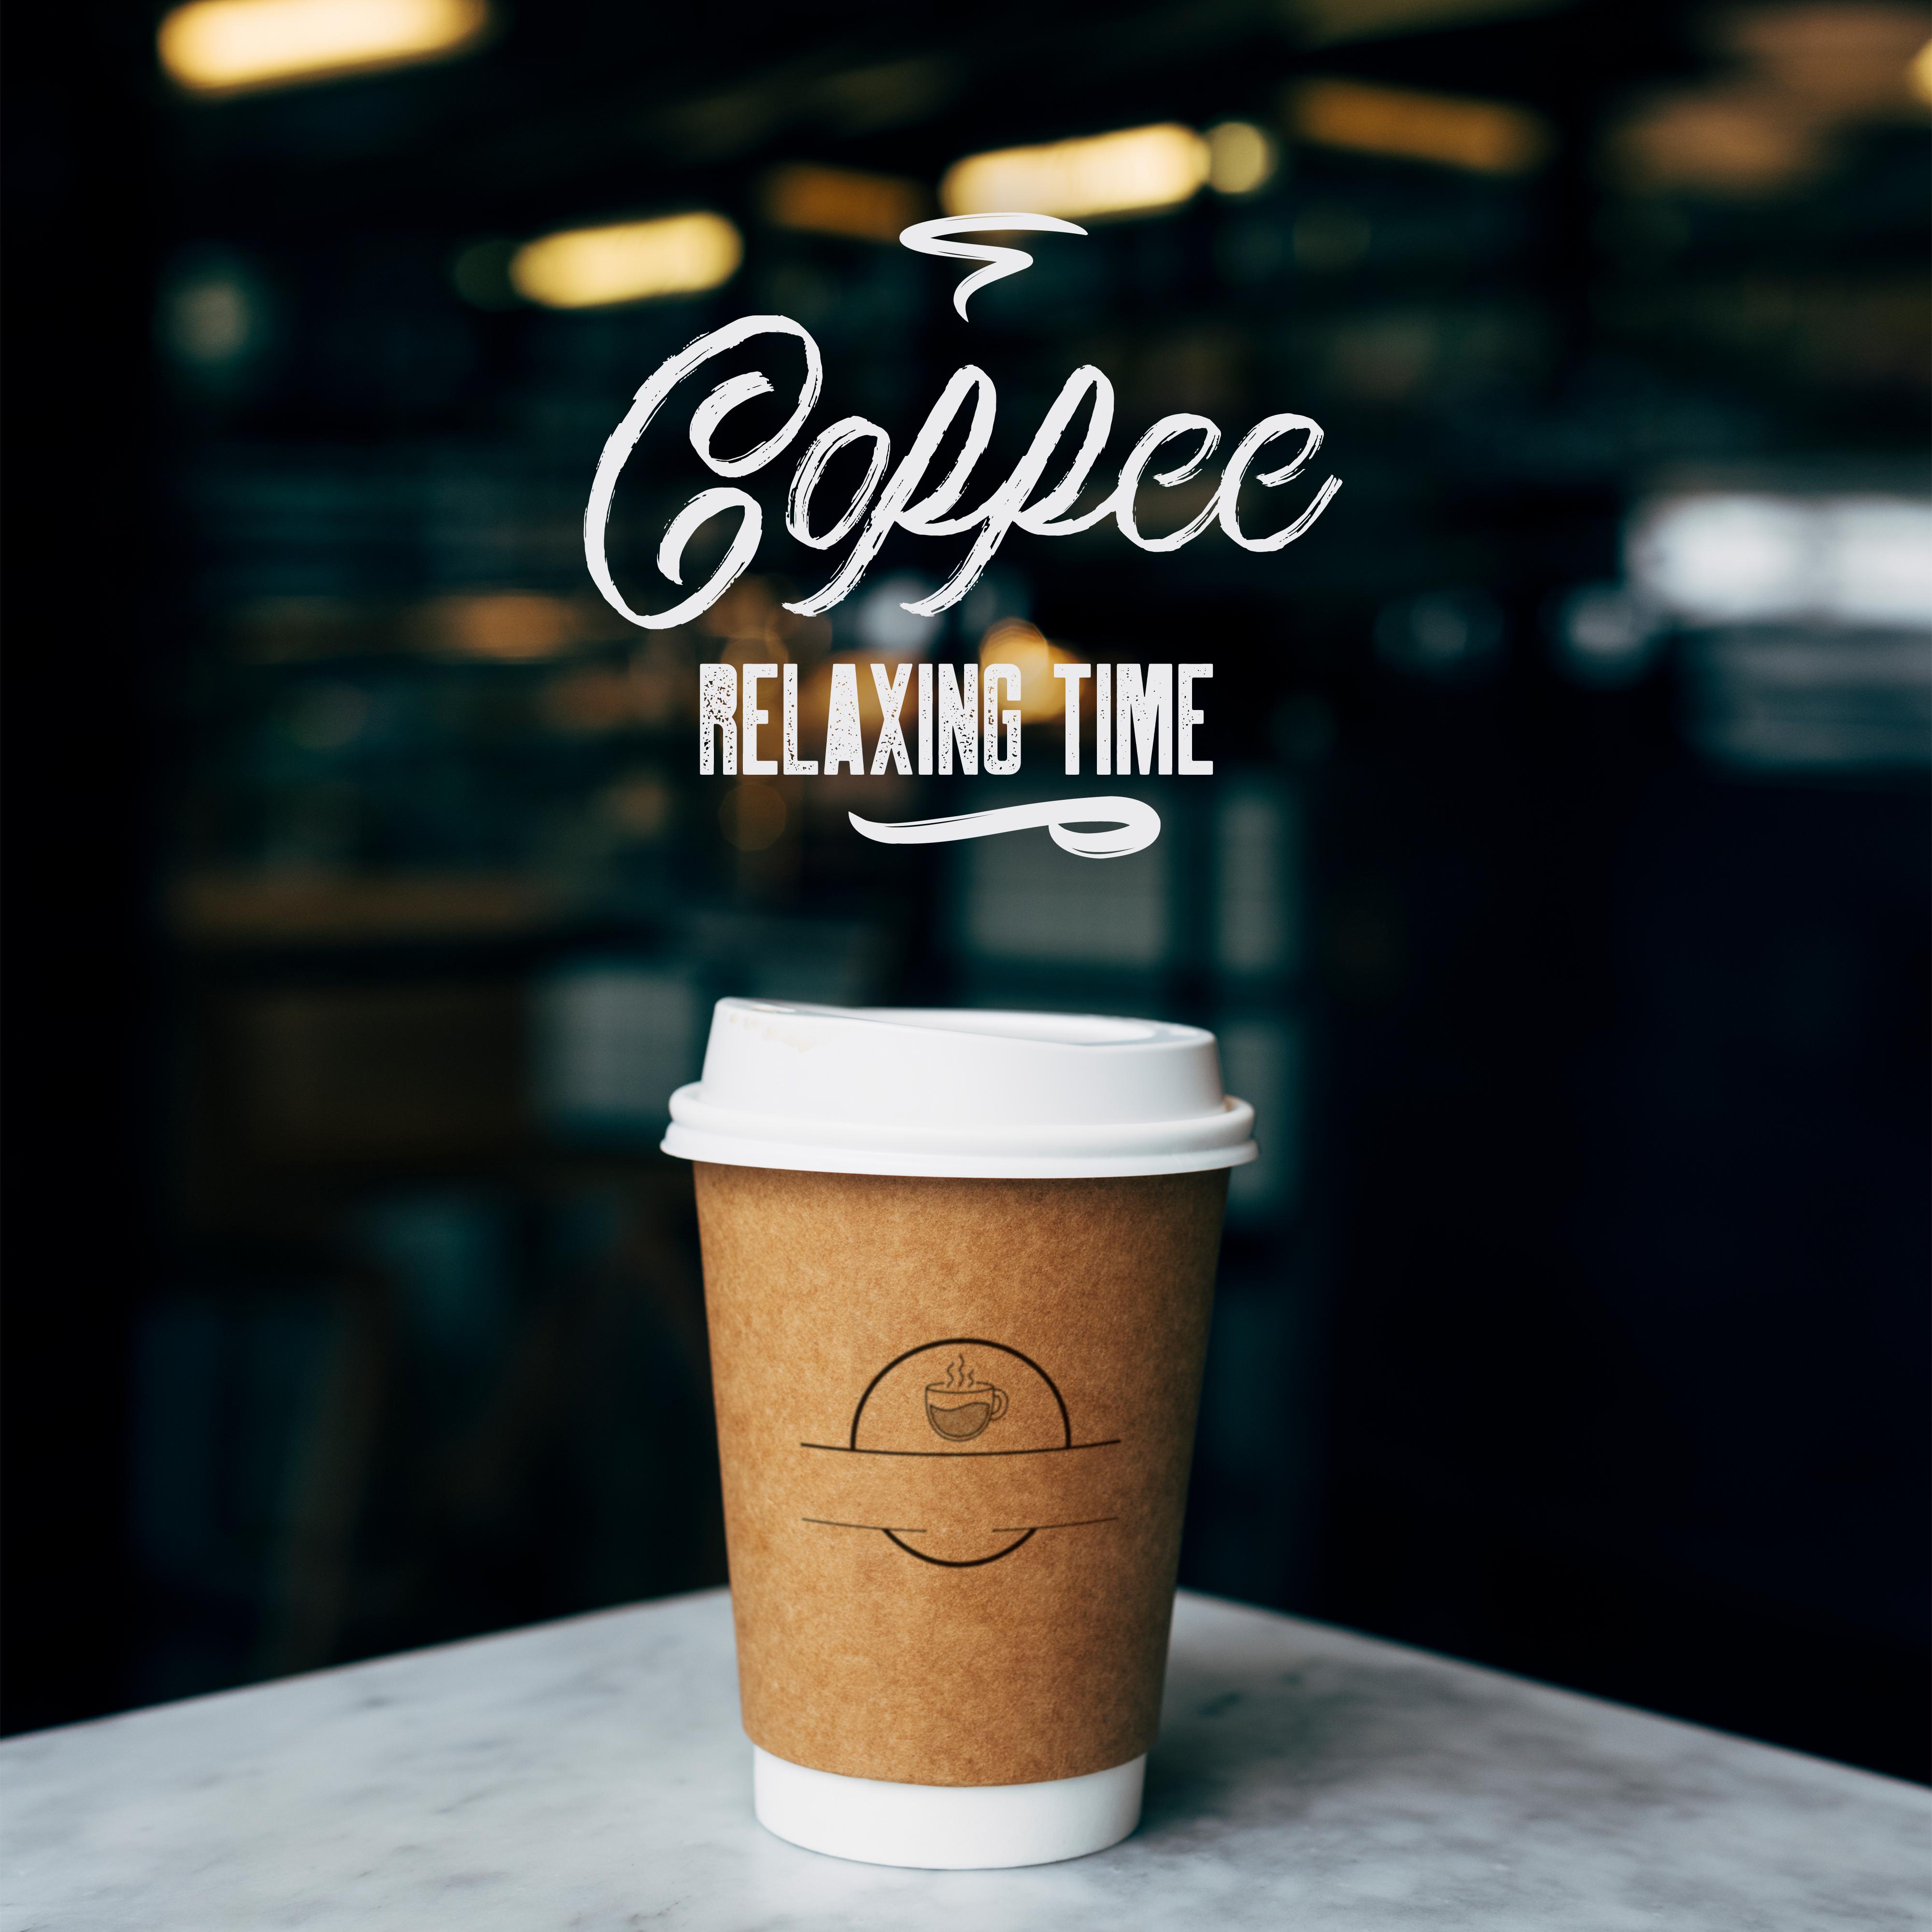 Coffee Relaxing Time  Instrumental Jazz Music Ambient, Relaxing Sounds After Work